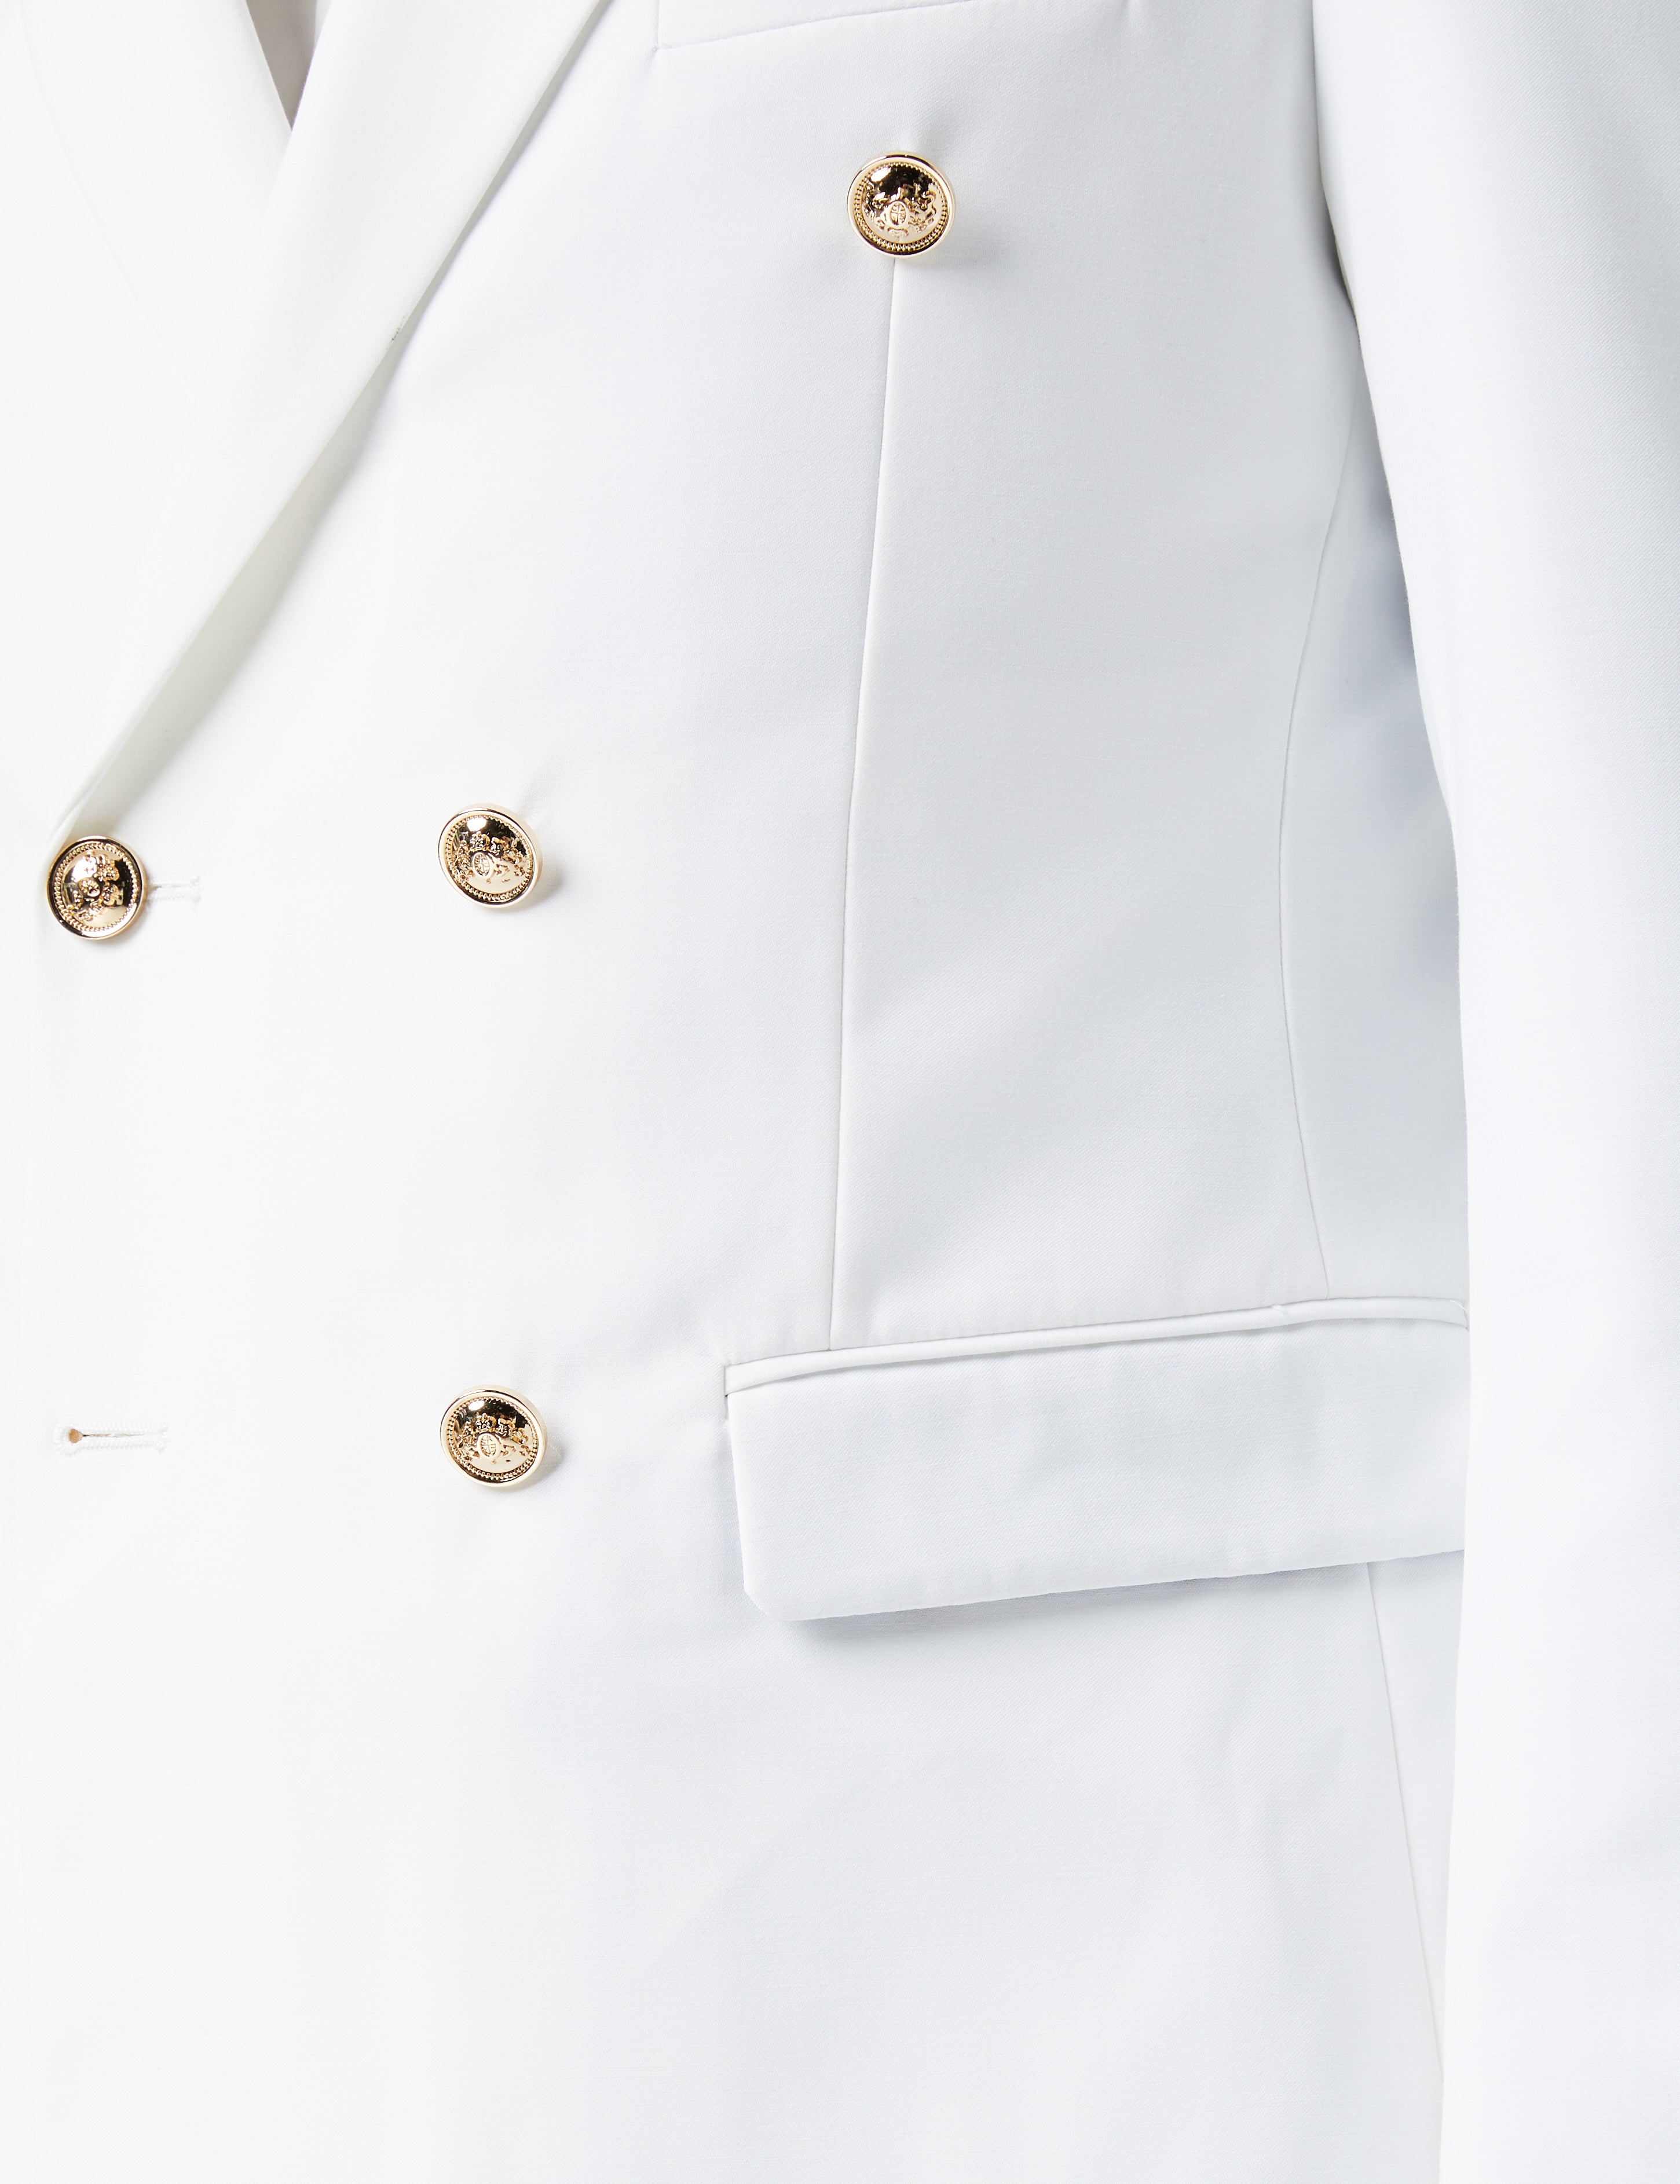 Double Breasted Gold Button White Jacket